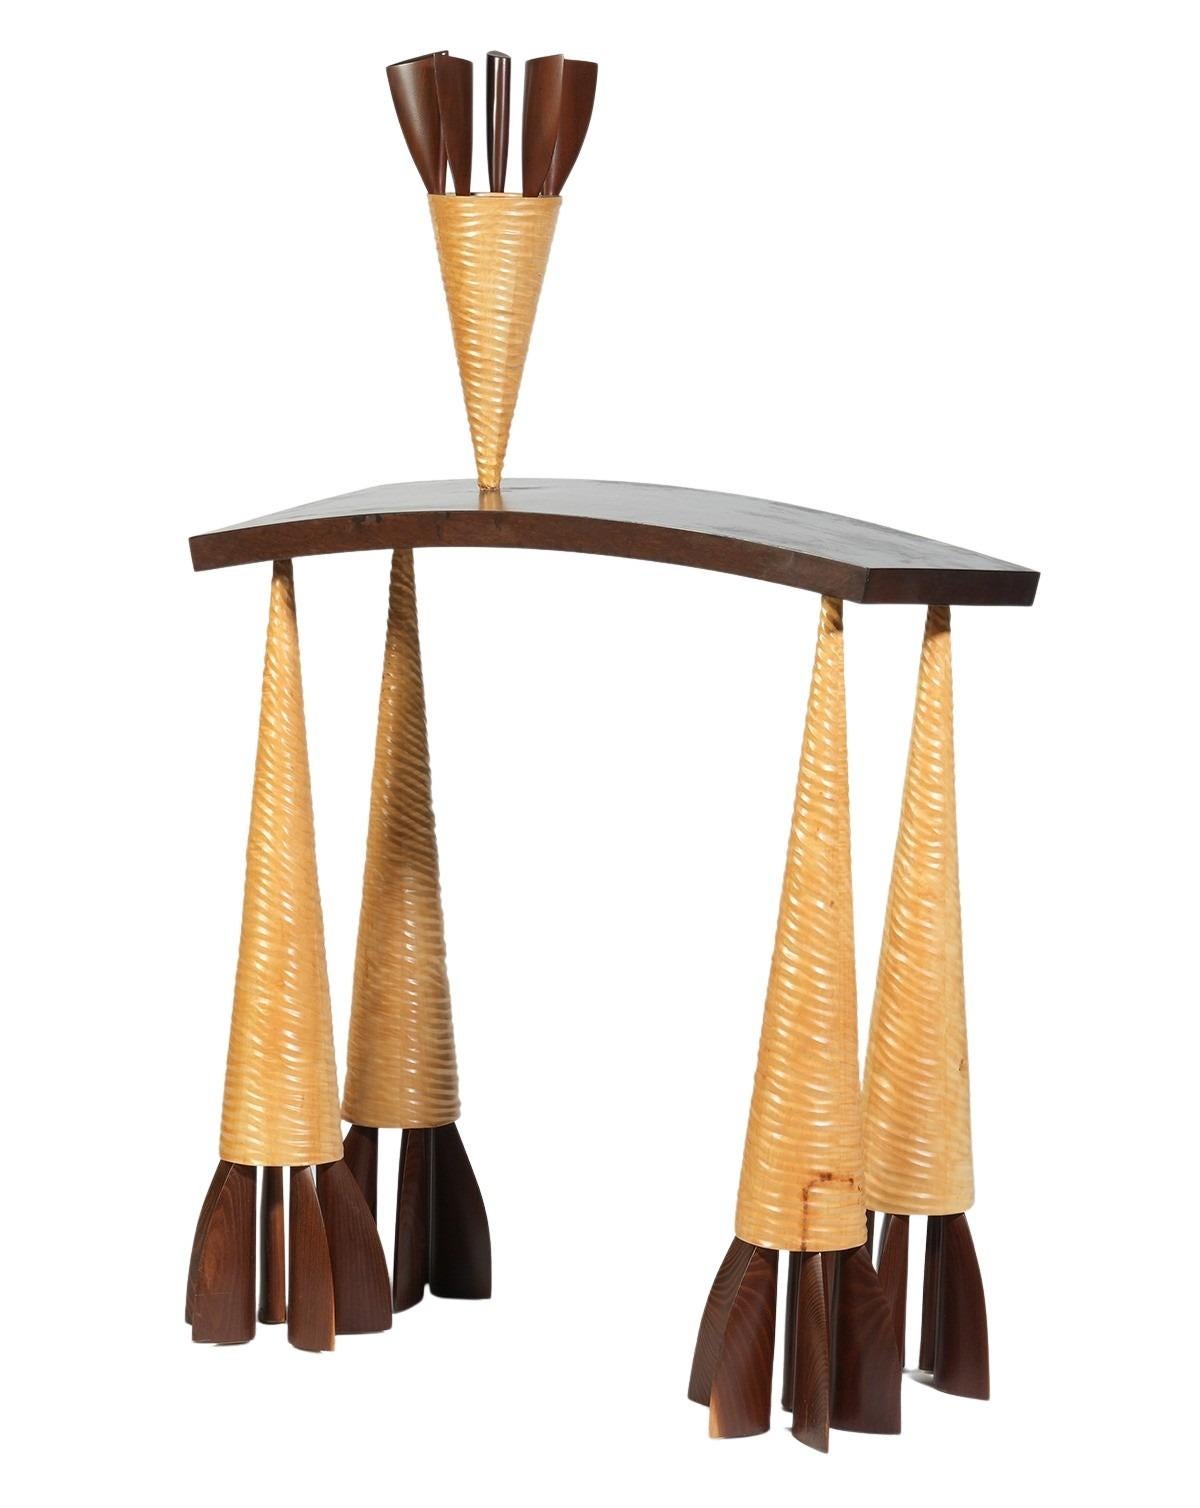 Wendell Castle, American (1932-2018). Unusual carved and lacquered wood console table raised on 4 triangular cone legs with a reverse curved top that has an attached inverted cone. Signed and dated on side of top, 1986.